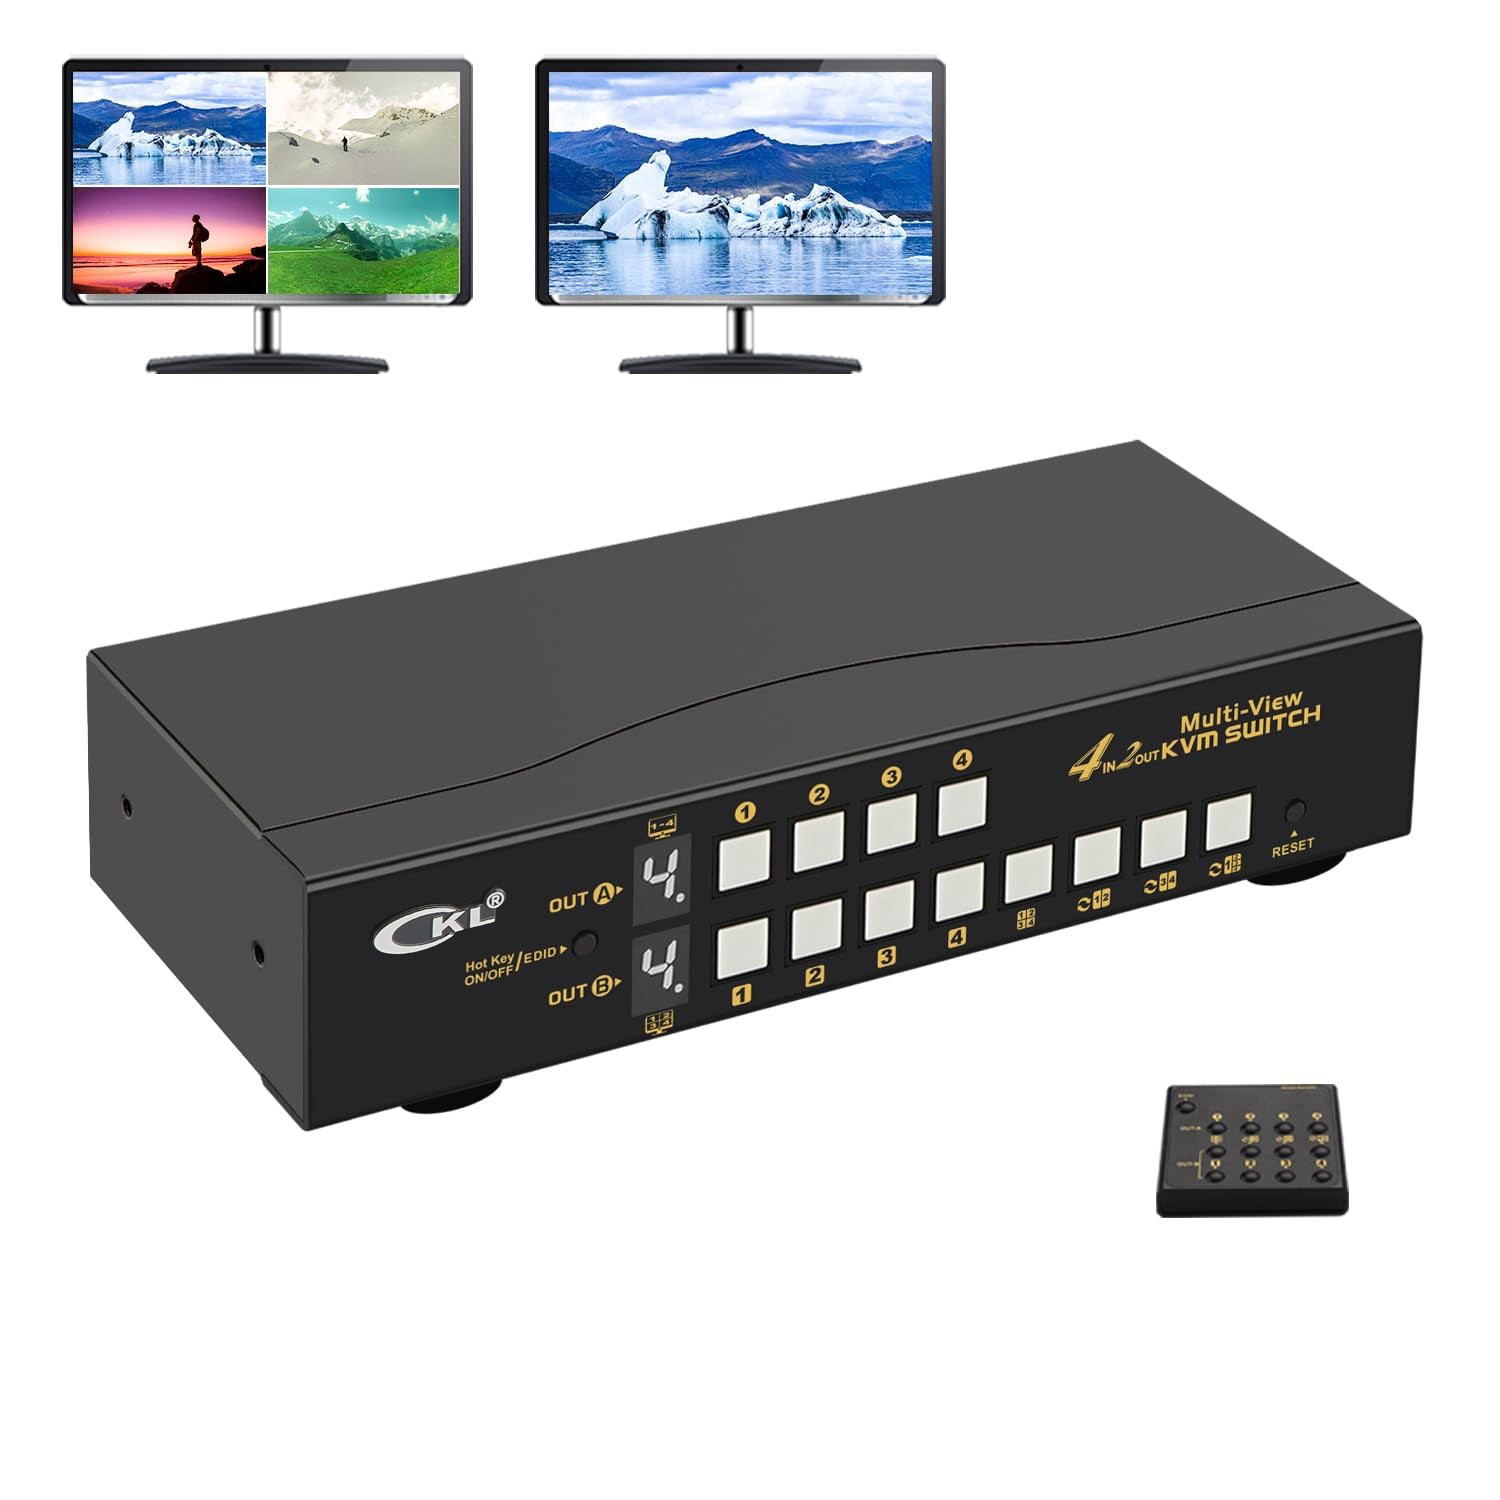 CKL 4 Port HDMI Split Multi-View KVM Switch Dual Monitor with Cables Supports Single-Screen, Dual-Screen, Quad-Screen Modes, Split and PIP Function, Hotkey Switching 42MVKVM-A